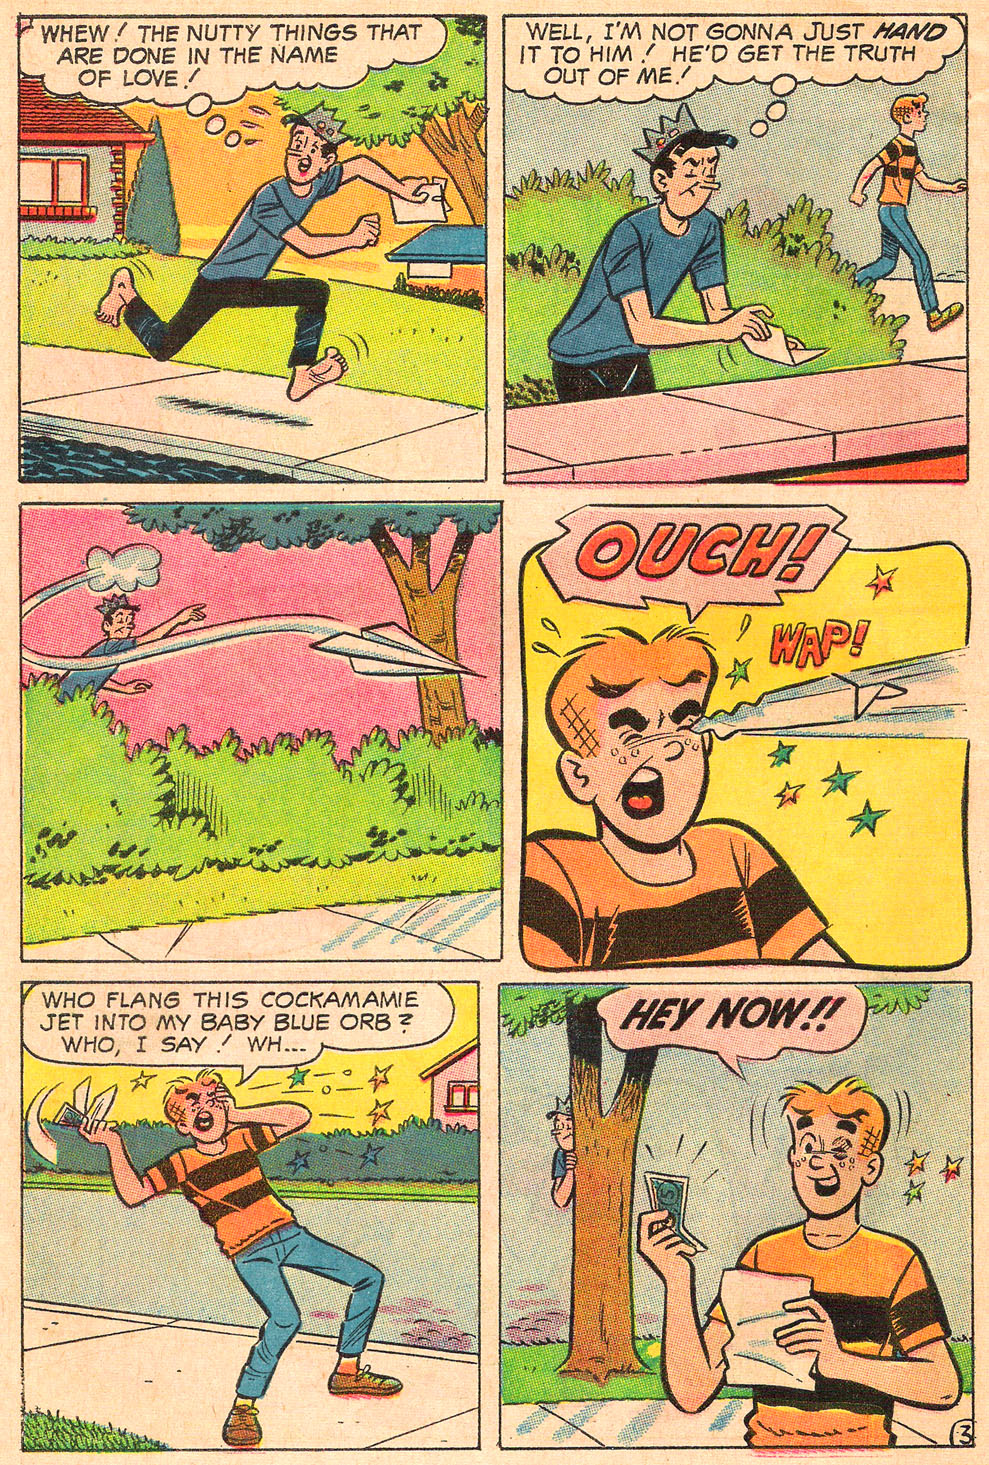 Read online Archie's Girls Betty and Veronica comic -  Issue #154 - 29